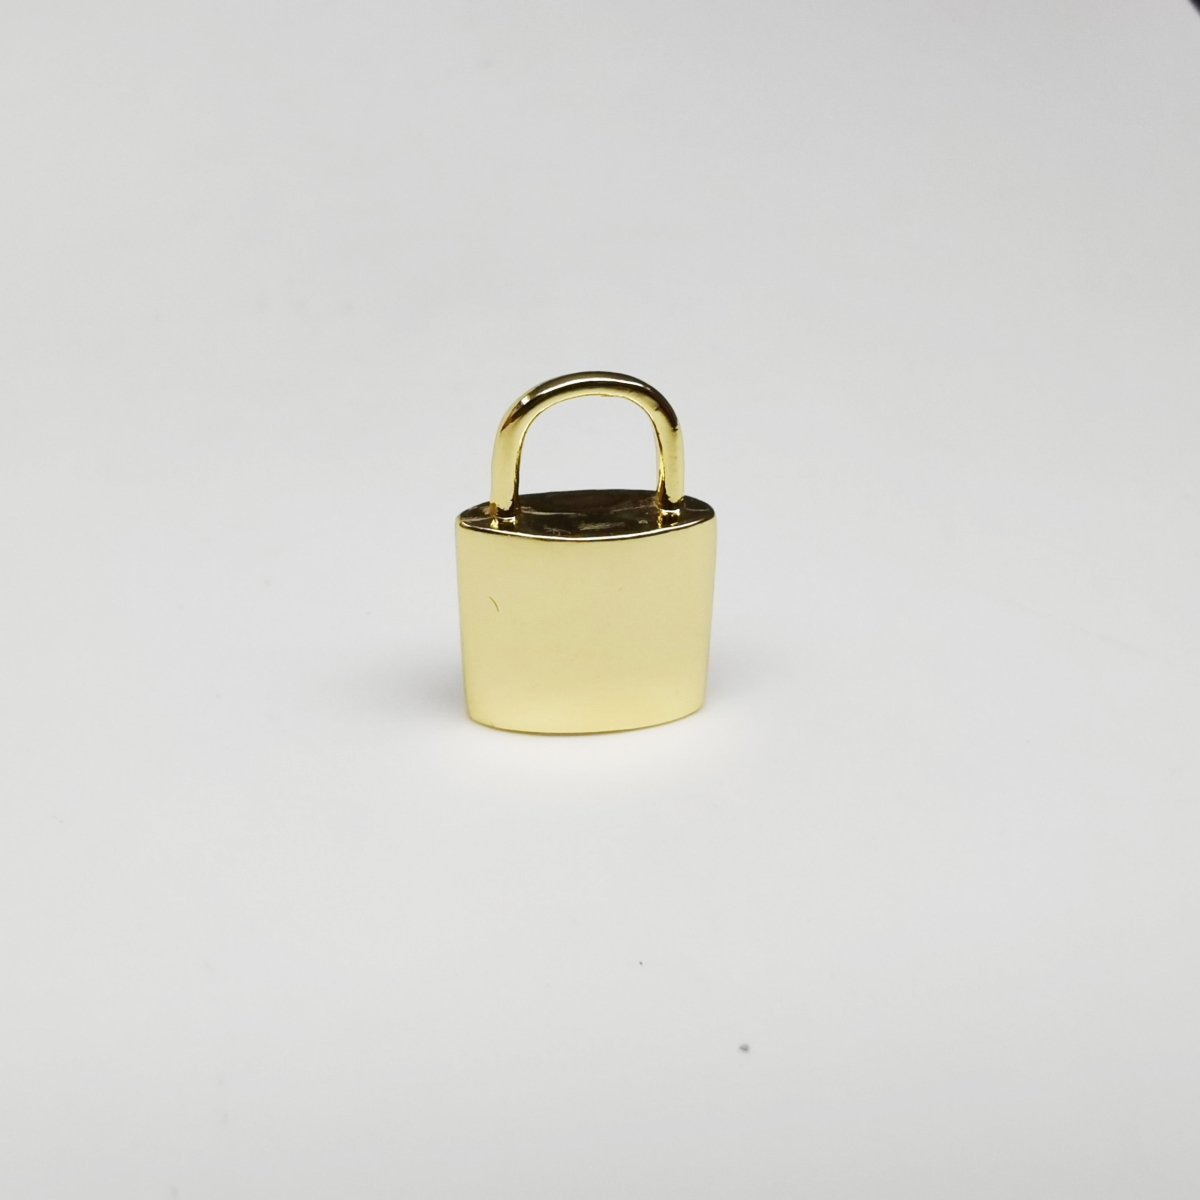 Simple Lock Padlock Gold Filled Charm Supplies For DIY Jewelry Making K-762 - DLUXCA